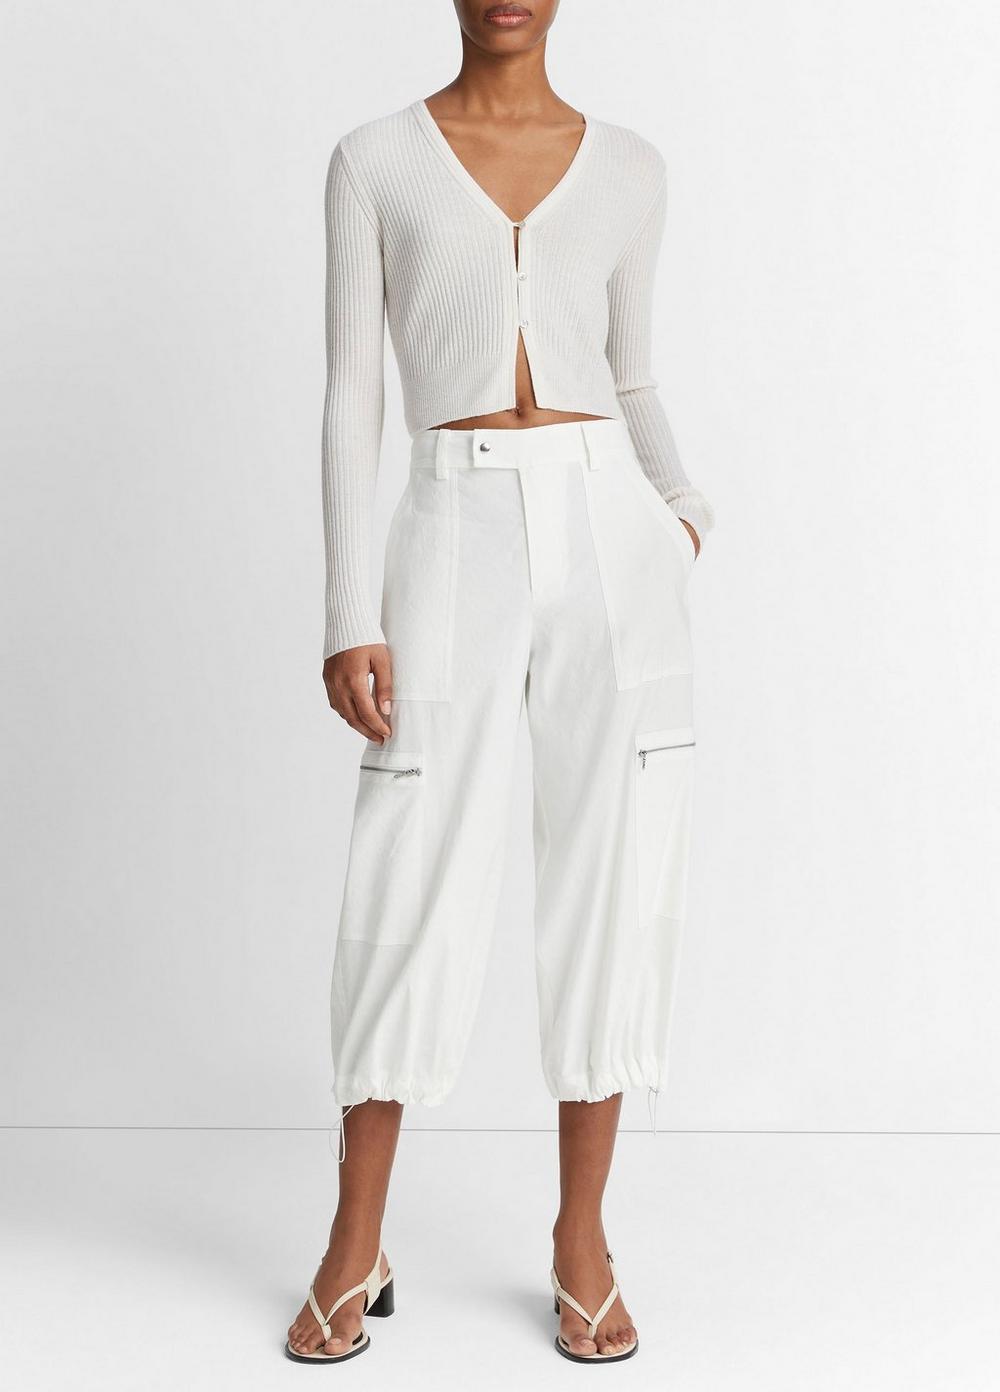 Low-Rise Cropped Parachute Pant, Off White, Size 8 Vince